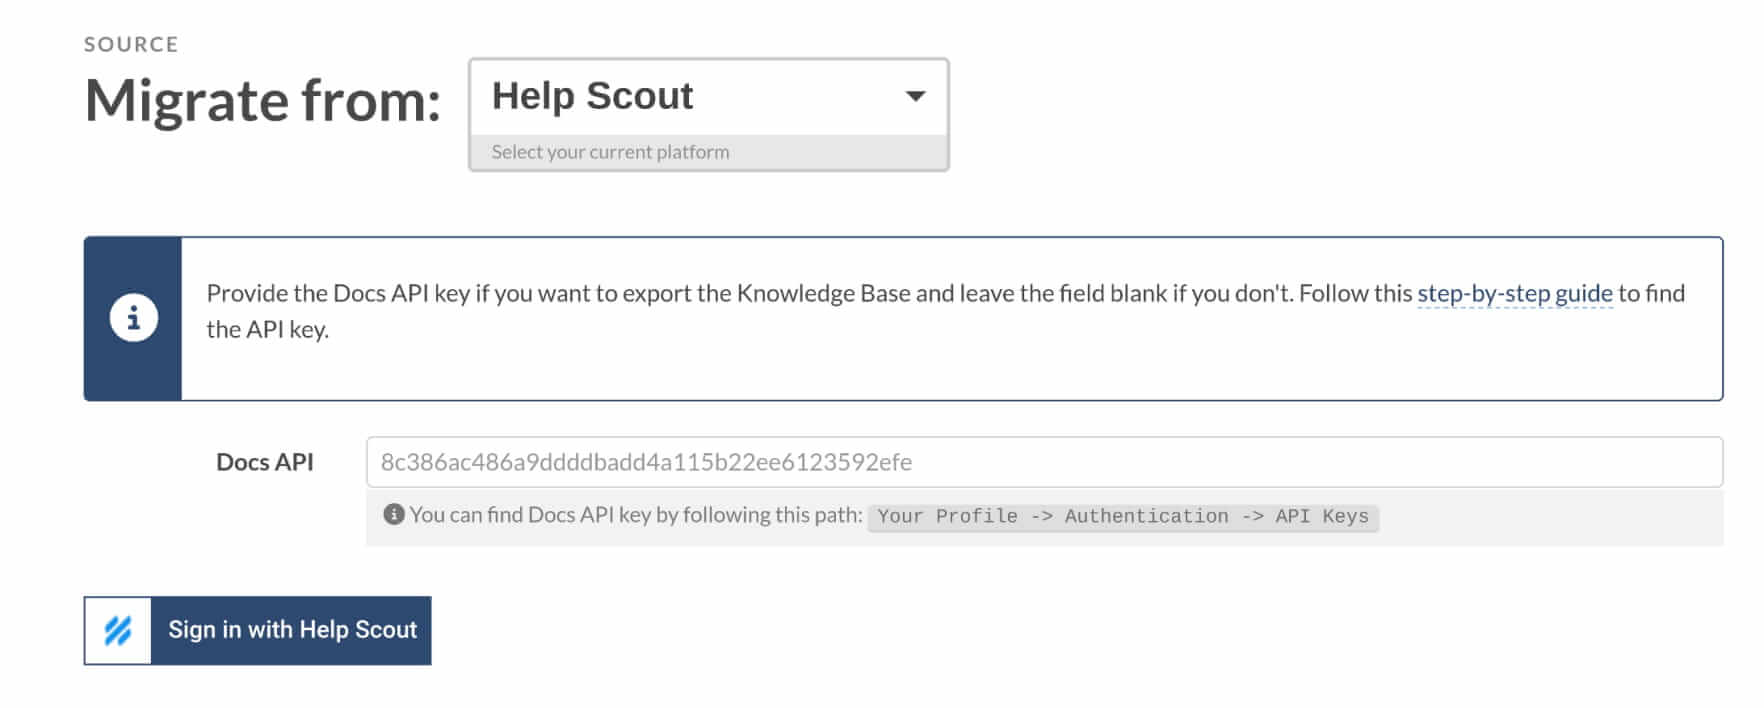 Help Scout Source - Migration Wizard